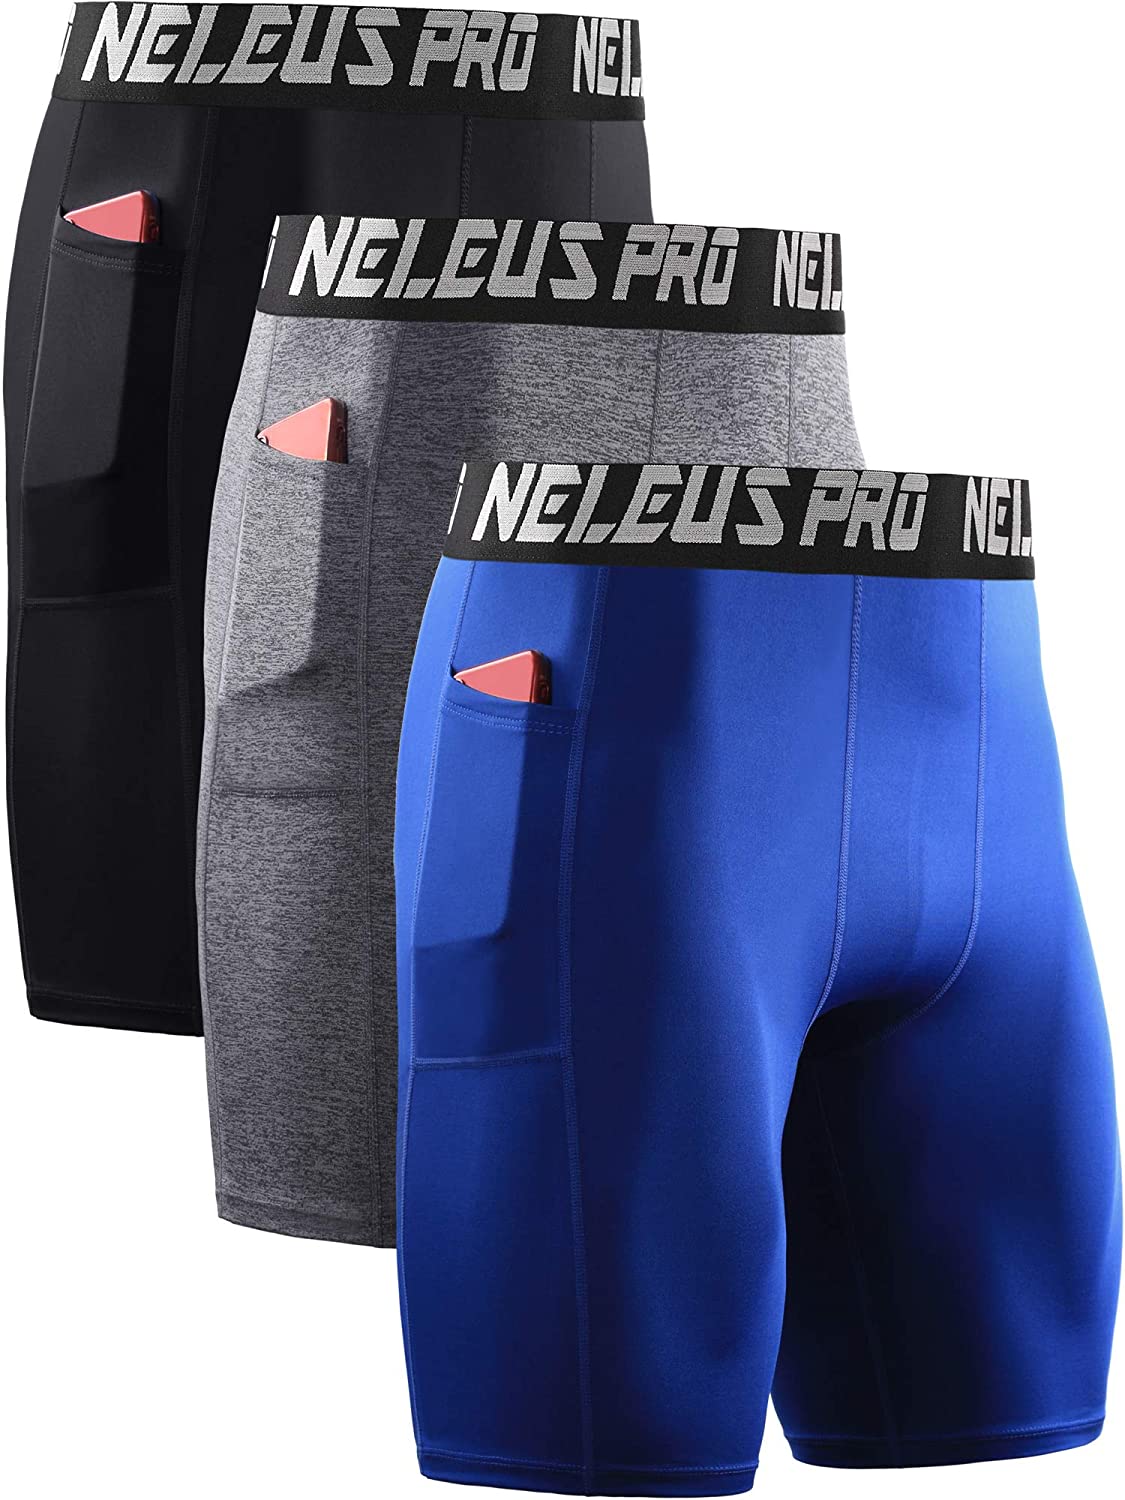  NELEUS Mens Compression Shorts 3 Pack Dry Fit Running Shorts